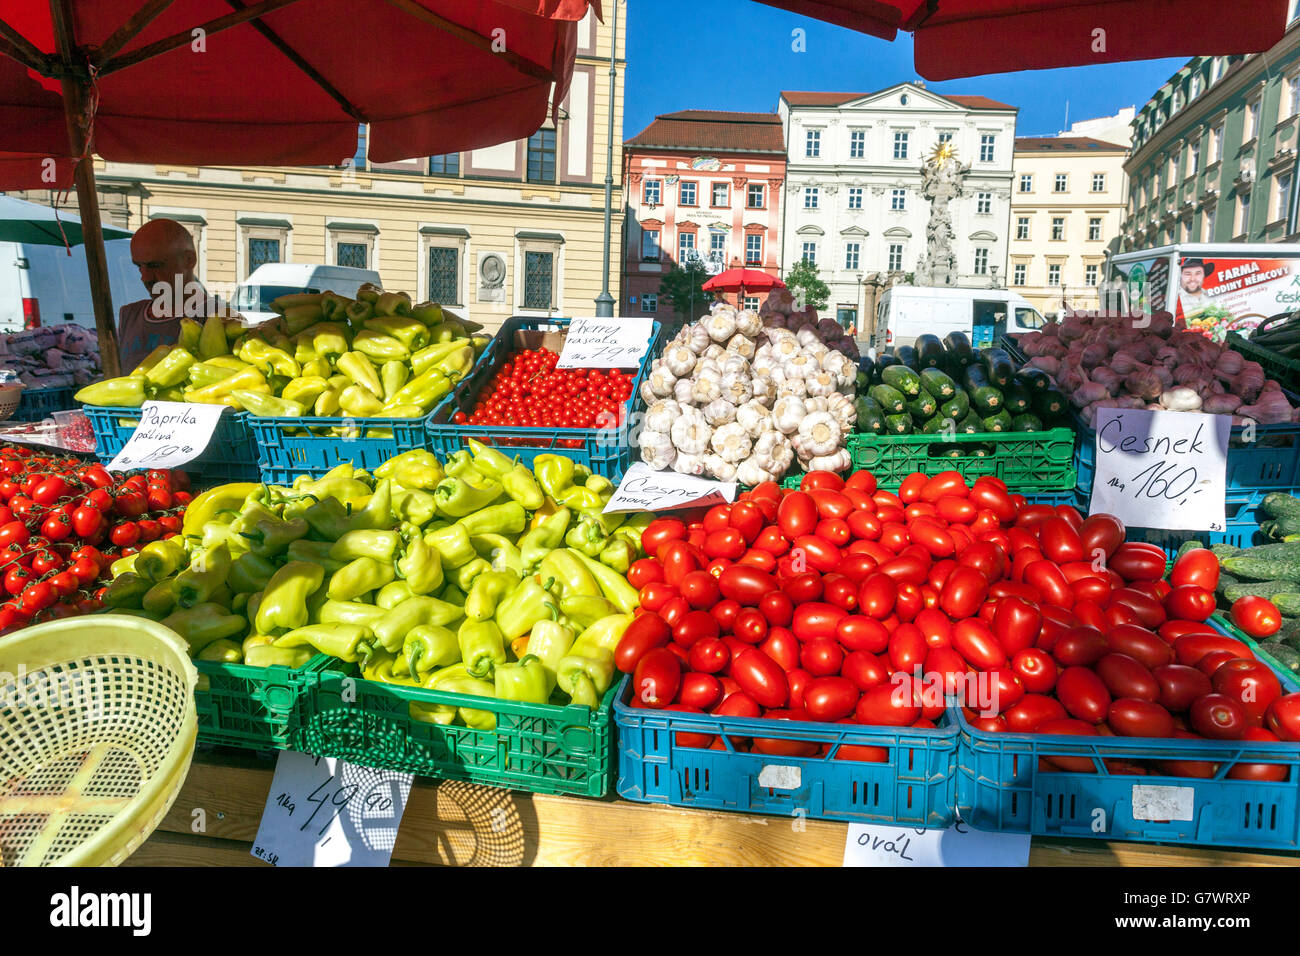 Zelny trh - square, Brno Cabbage Market square is a traditional marketplace with fruits, vegetables, and flowers. Brno Moravia, Czech Republic Stock Photo